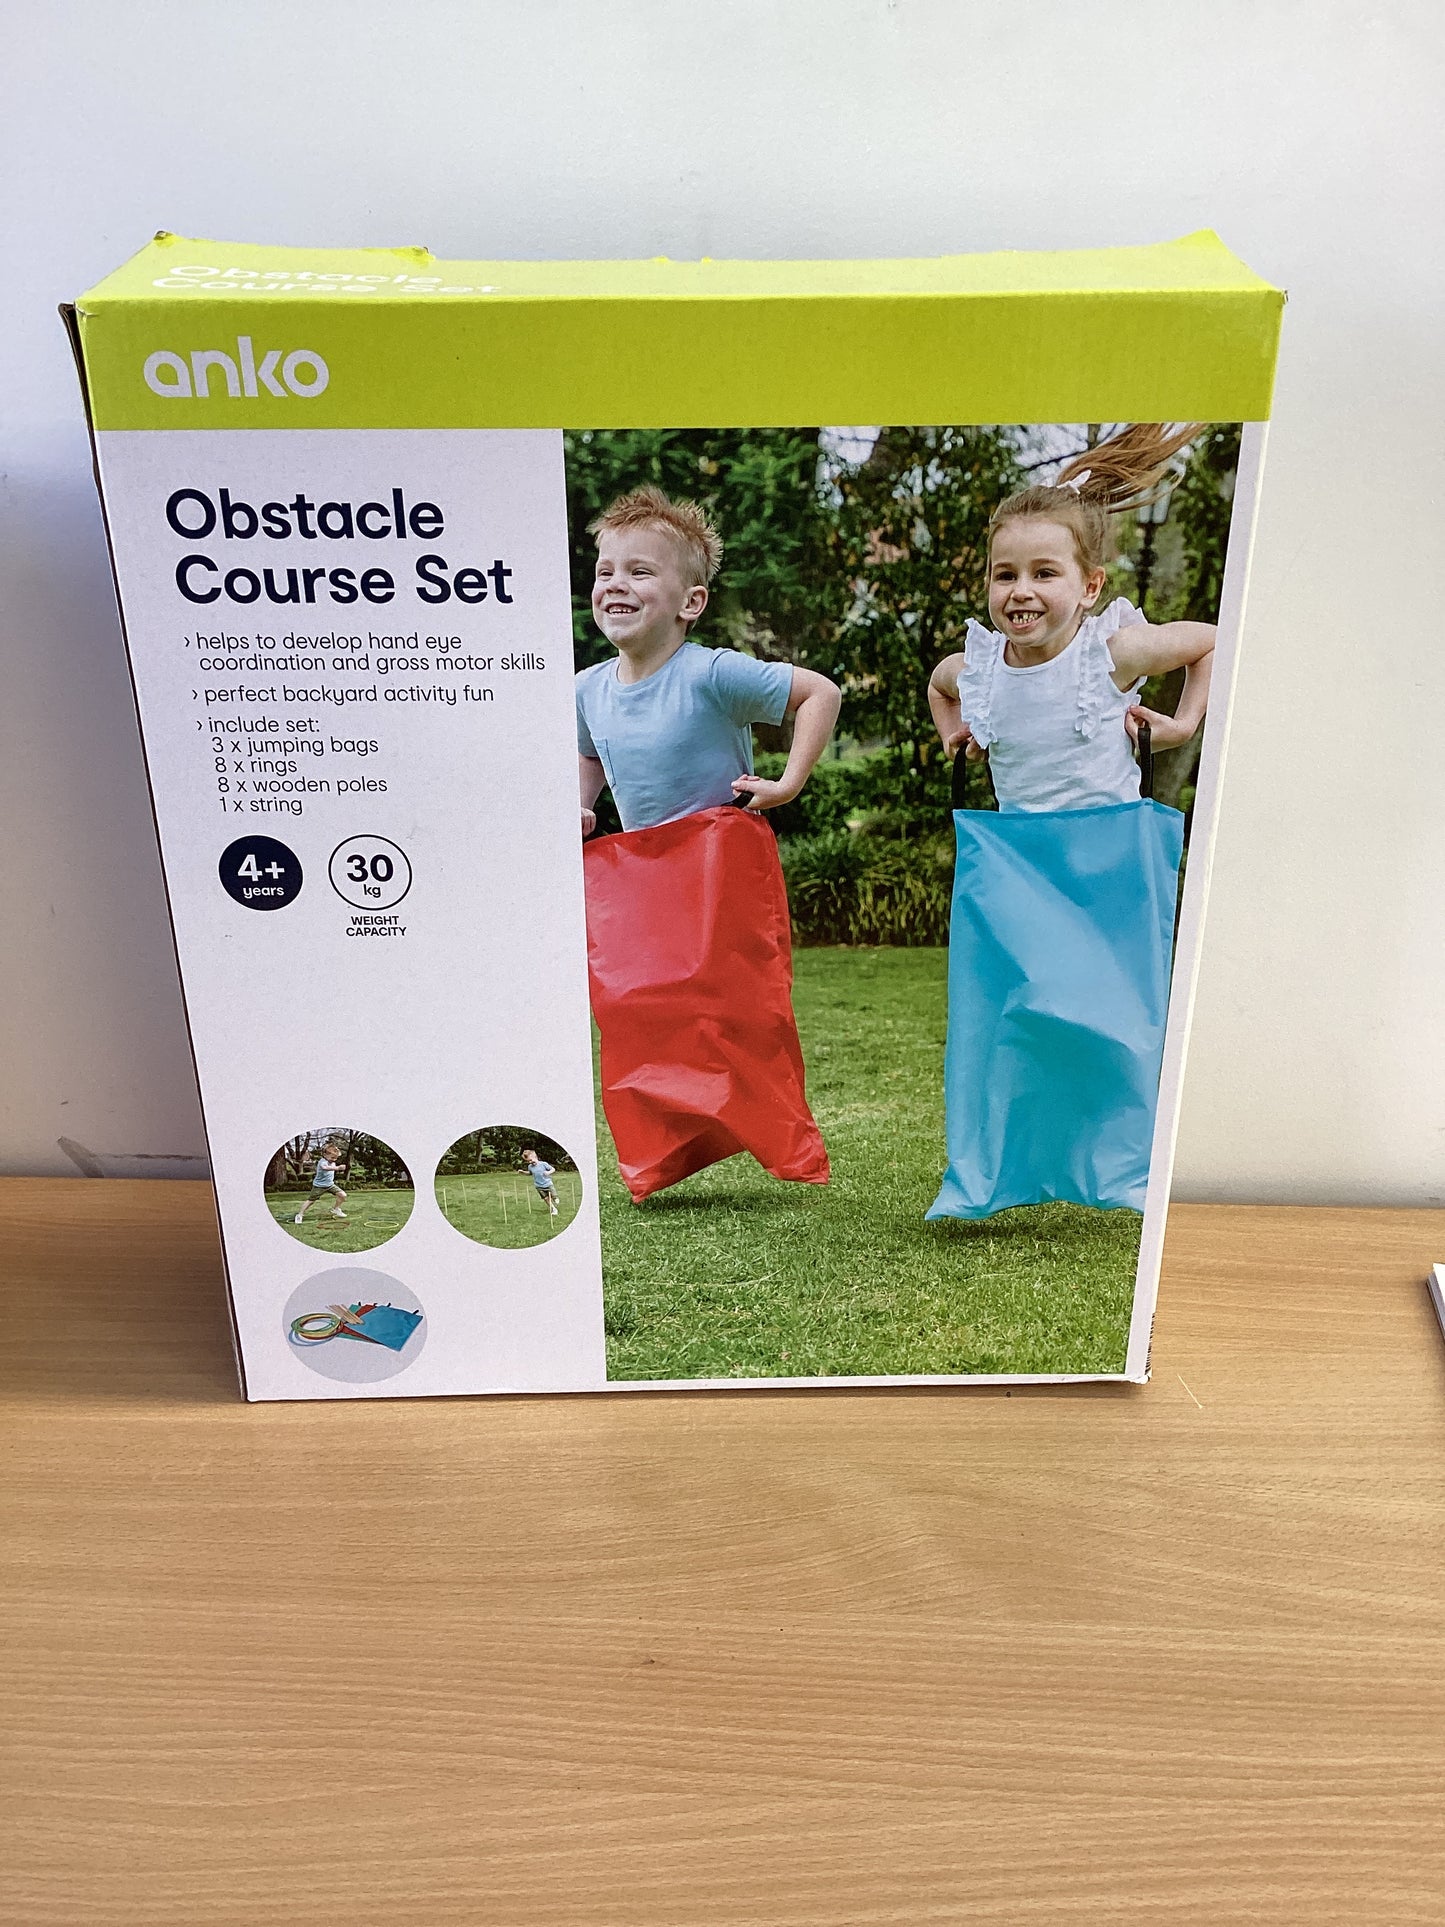 Anko obstacle course set